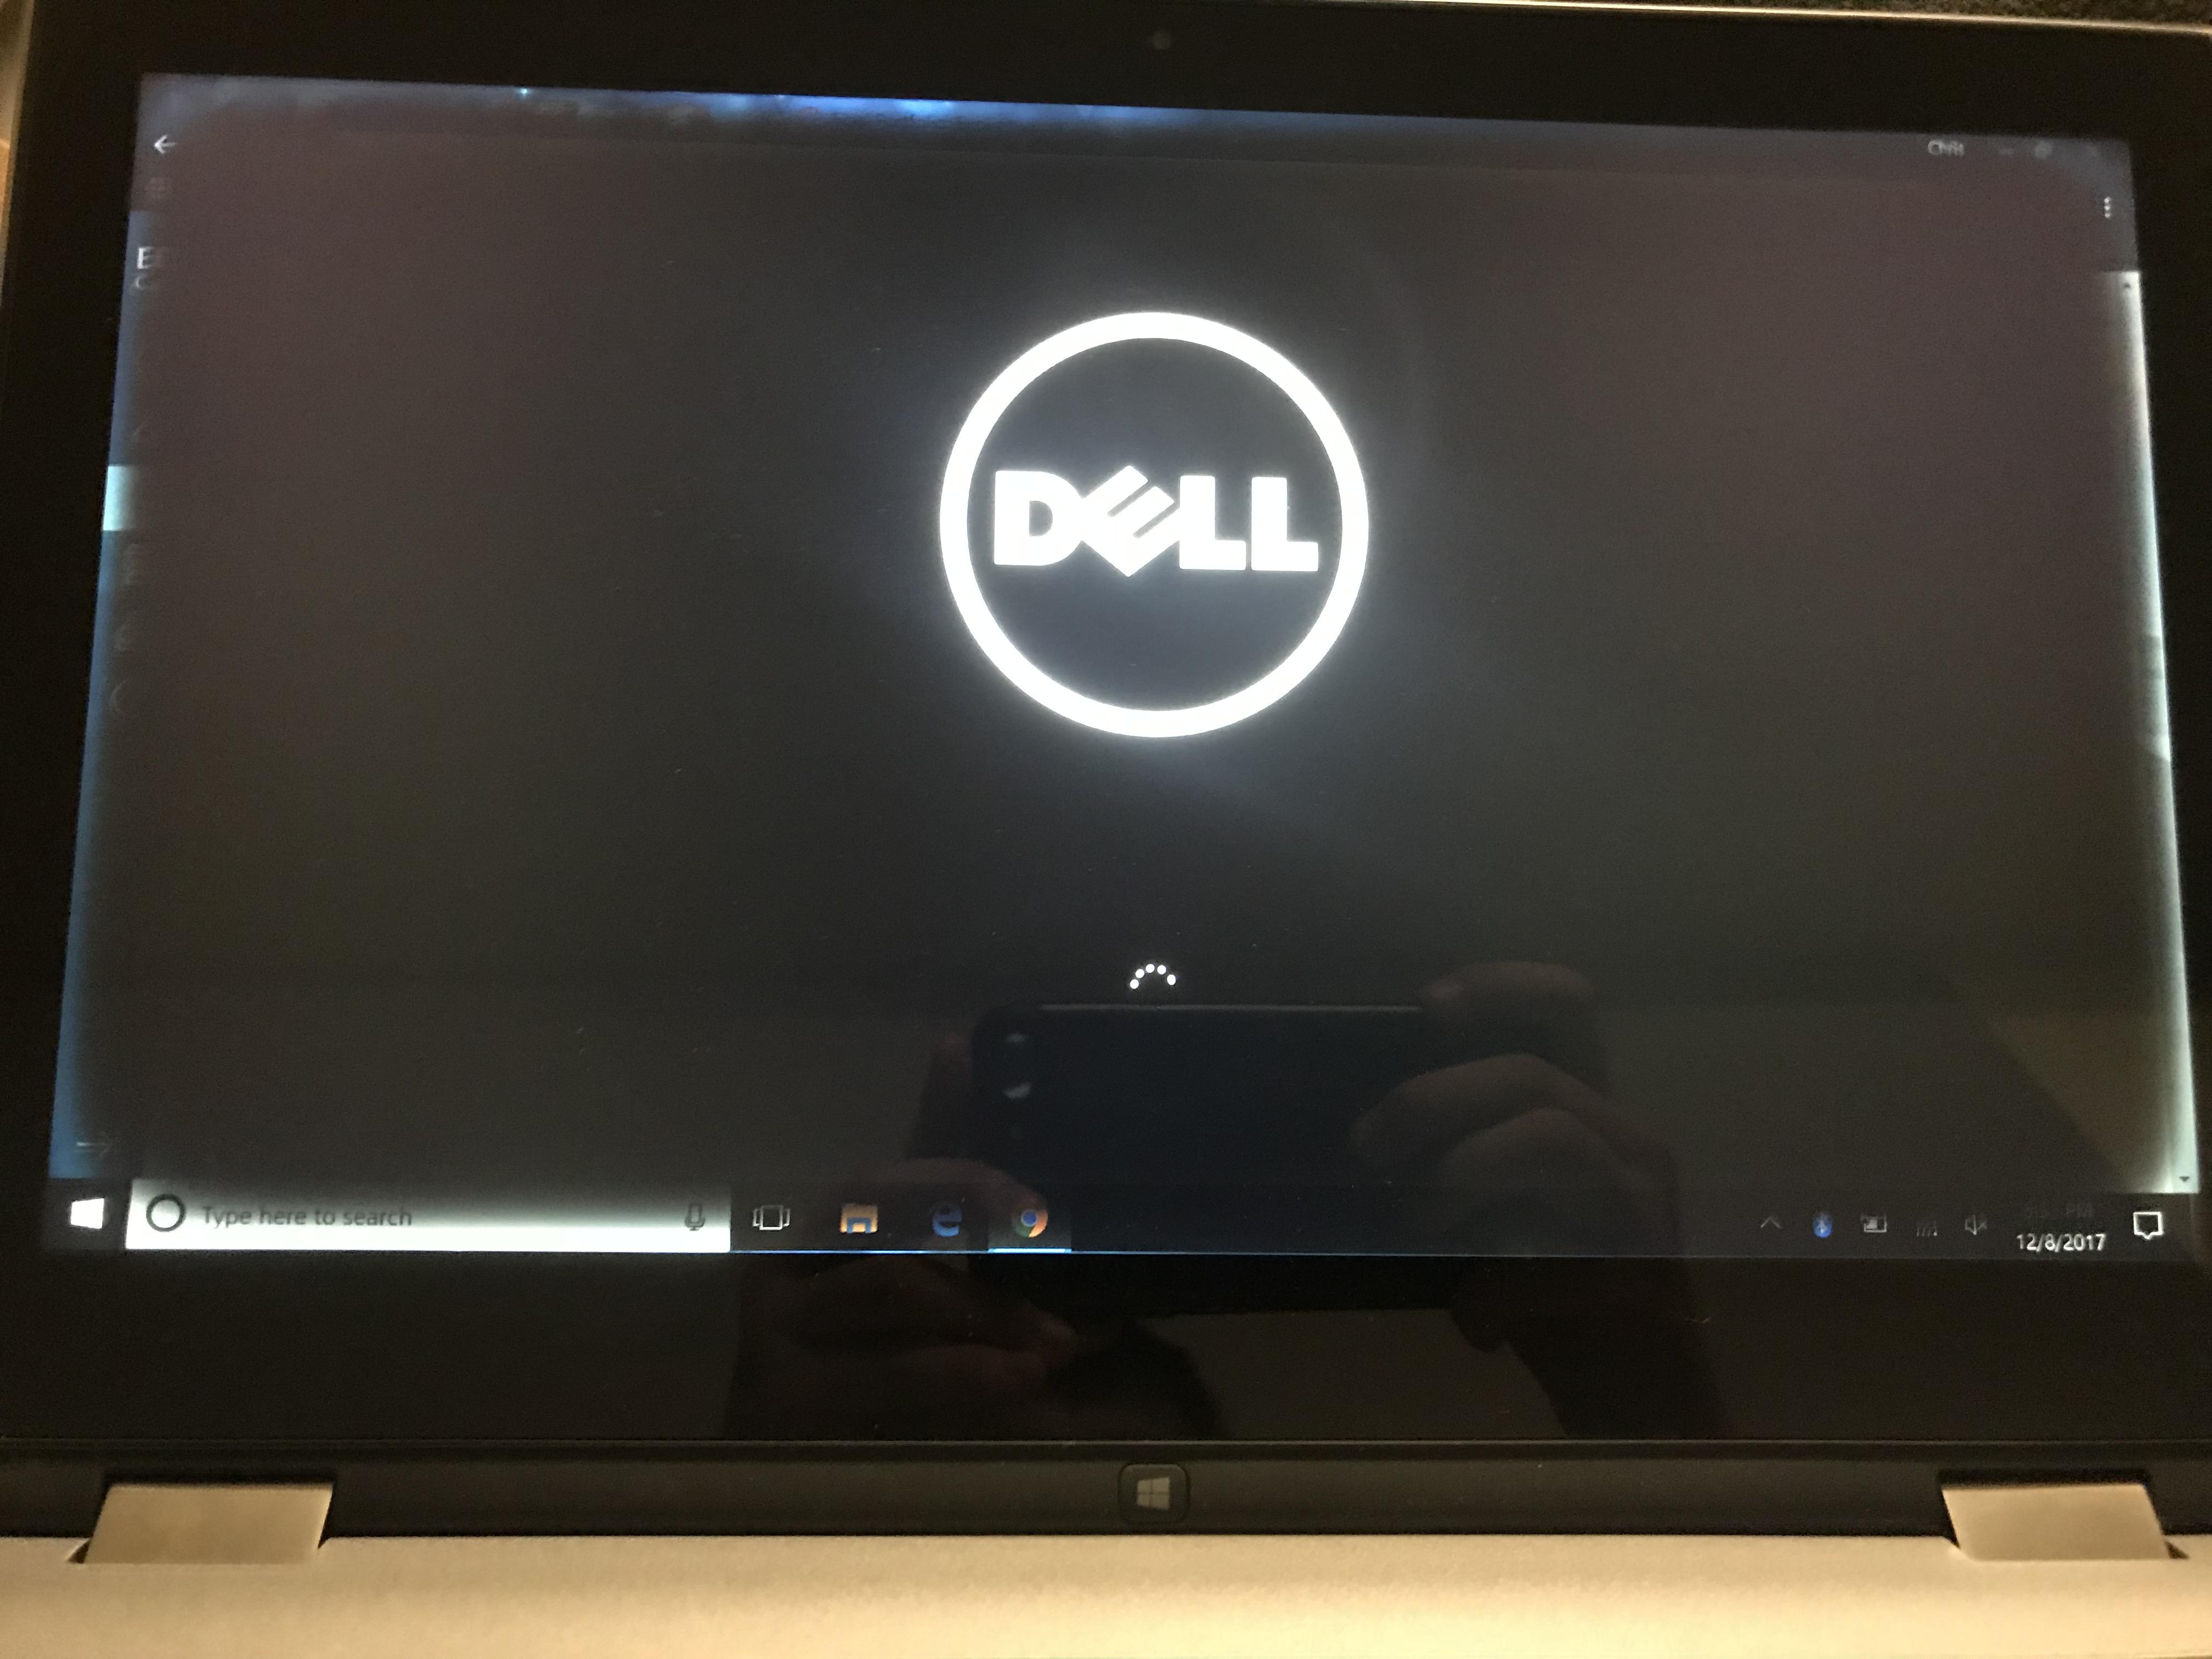 Problems with screen. - Dell Community